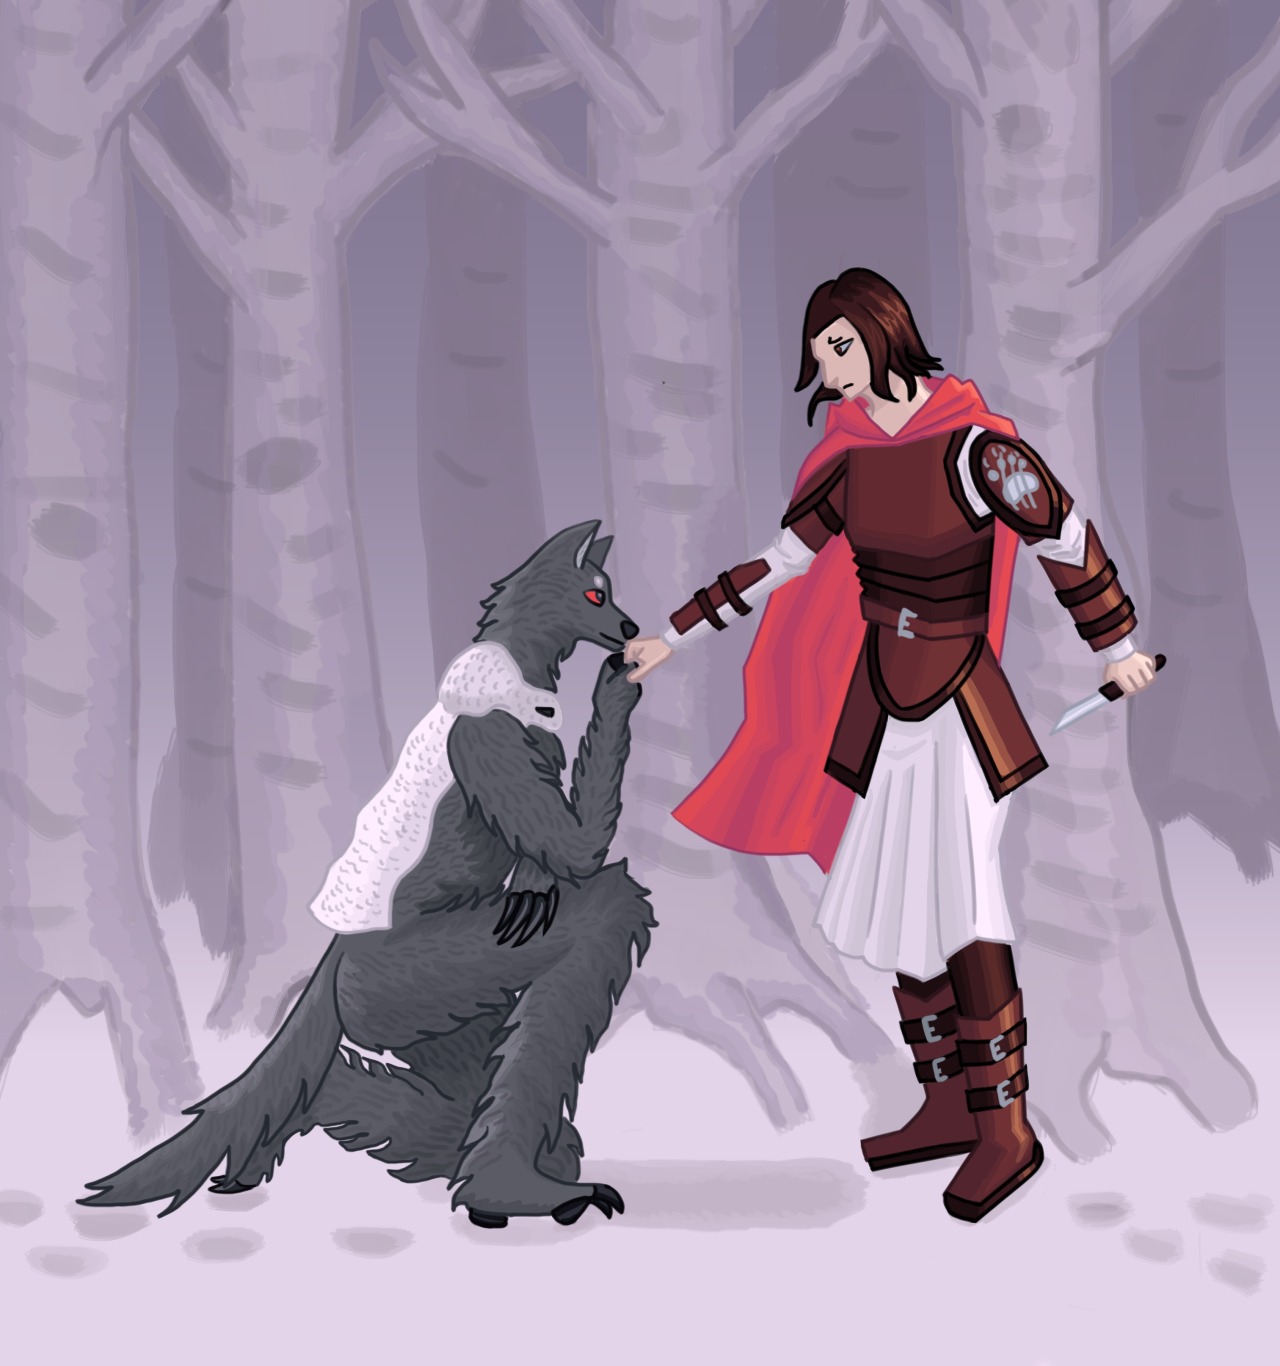 Really like little red riding hood, lady knights, and fairytale retellings. Expect many more red-riding hood images, it’s a years-long obsession not leaving anytime soon. Image Id: An anthropomorphic gray wolf with a sheep skin cape and red eyes kneels before a young adult in leather armor. The wolf kisses her hand. Her conflicted face is framed by her short brunette hair. On her upper left arm’s armor is a metal engraving of a slashed through paw. Her left hand holds a knife. She wears a white skirt, brown leggings, and brown boots. A red cape billows out behind her. The figures stand in a snowy meadow in front of many aspens.  #little red riding hood #fairy tales#fairy tale #fairy tale retelling  #little red riding hood retelling #digital aritst#digital fanart #digital fantasy art #krita art#kritaart#digital illustration#krita illustration